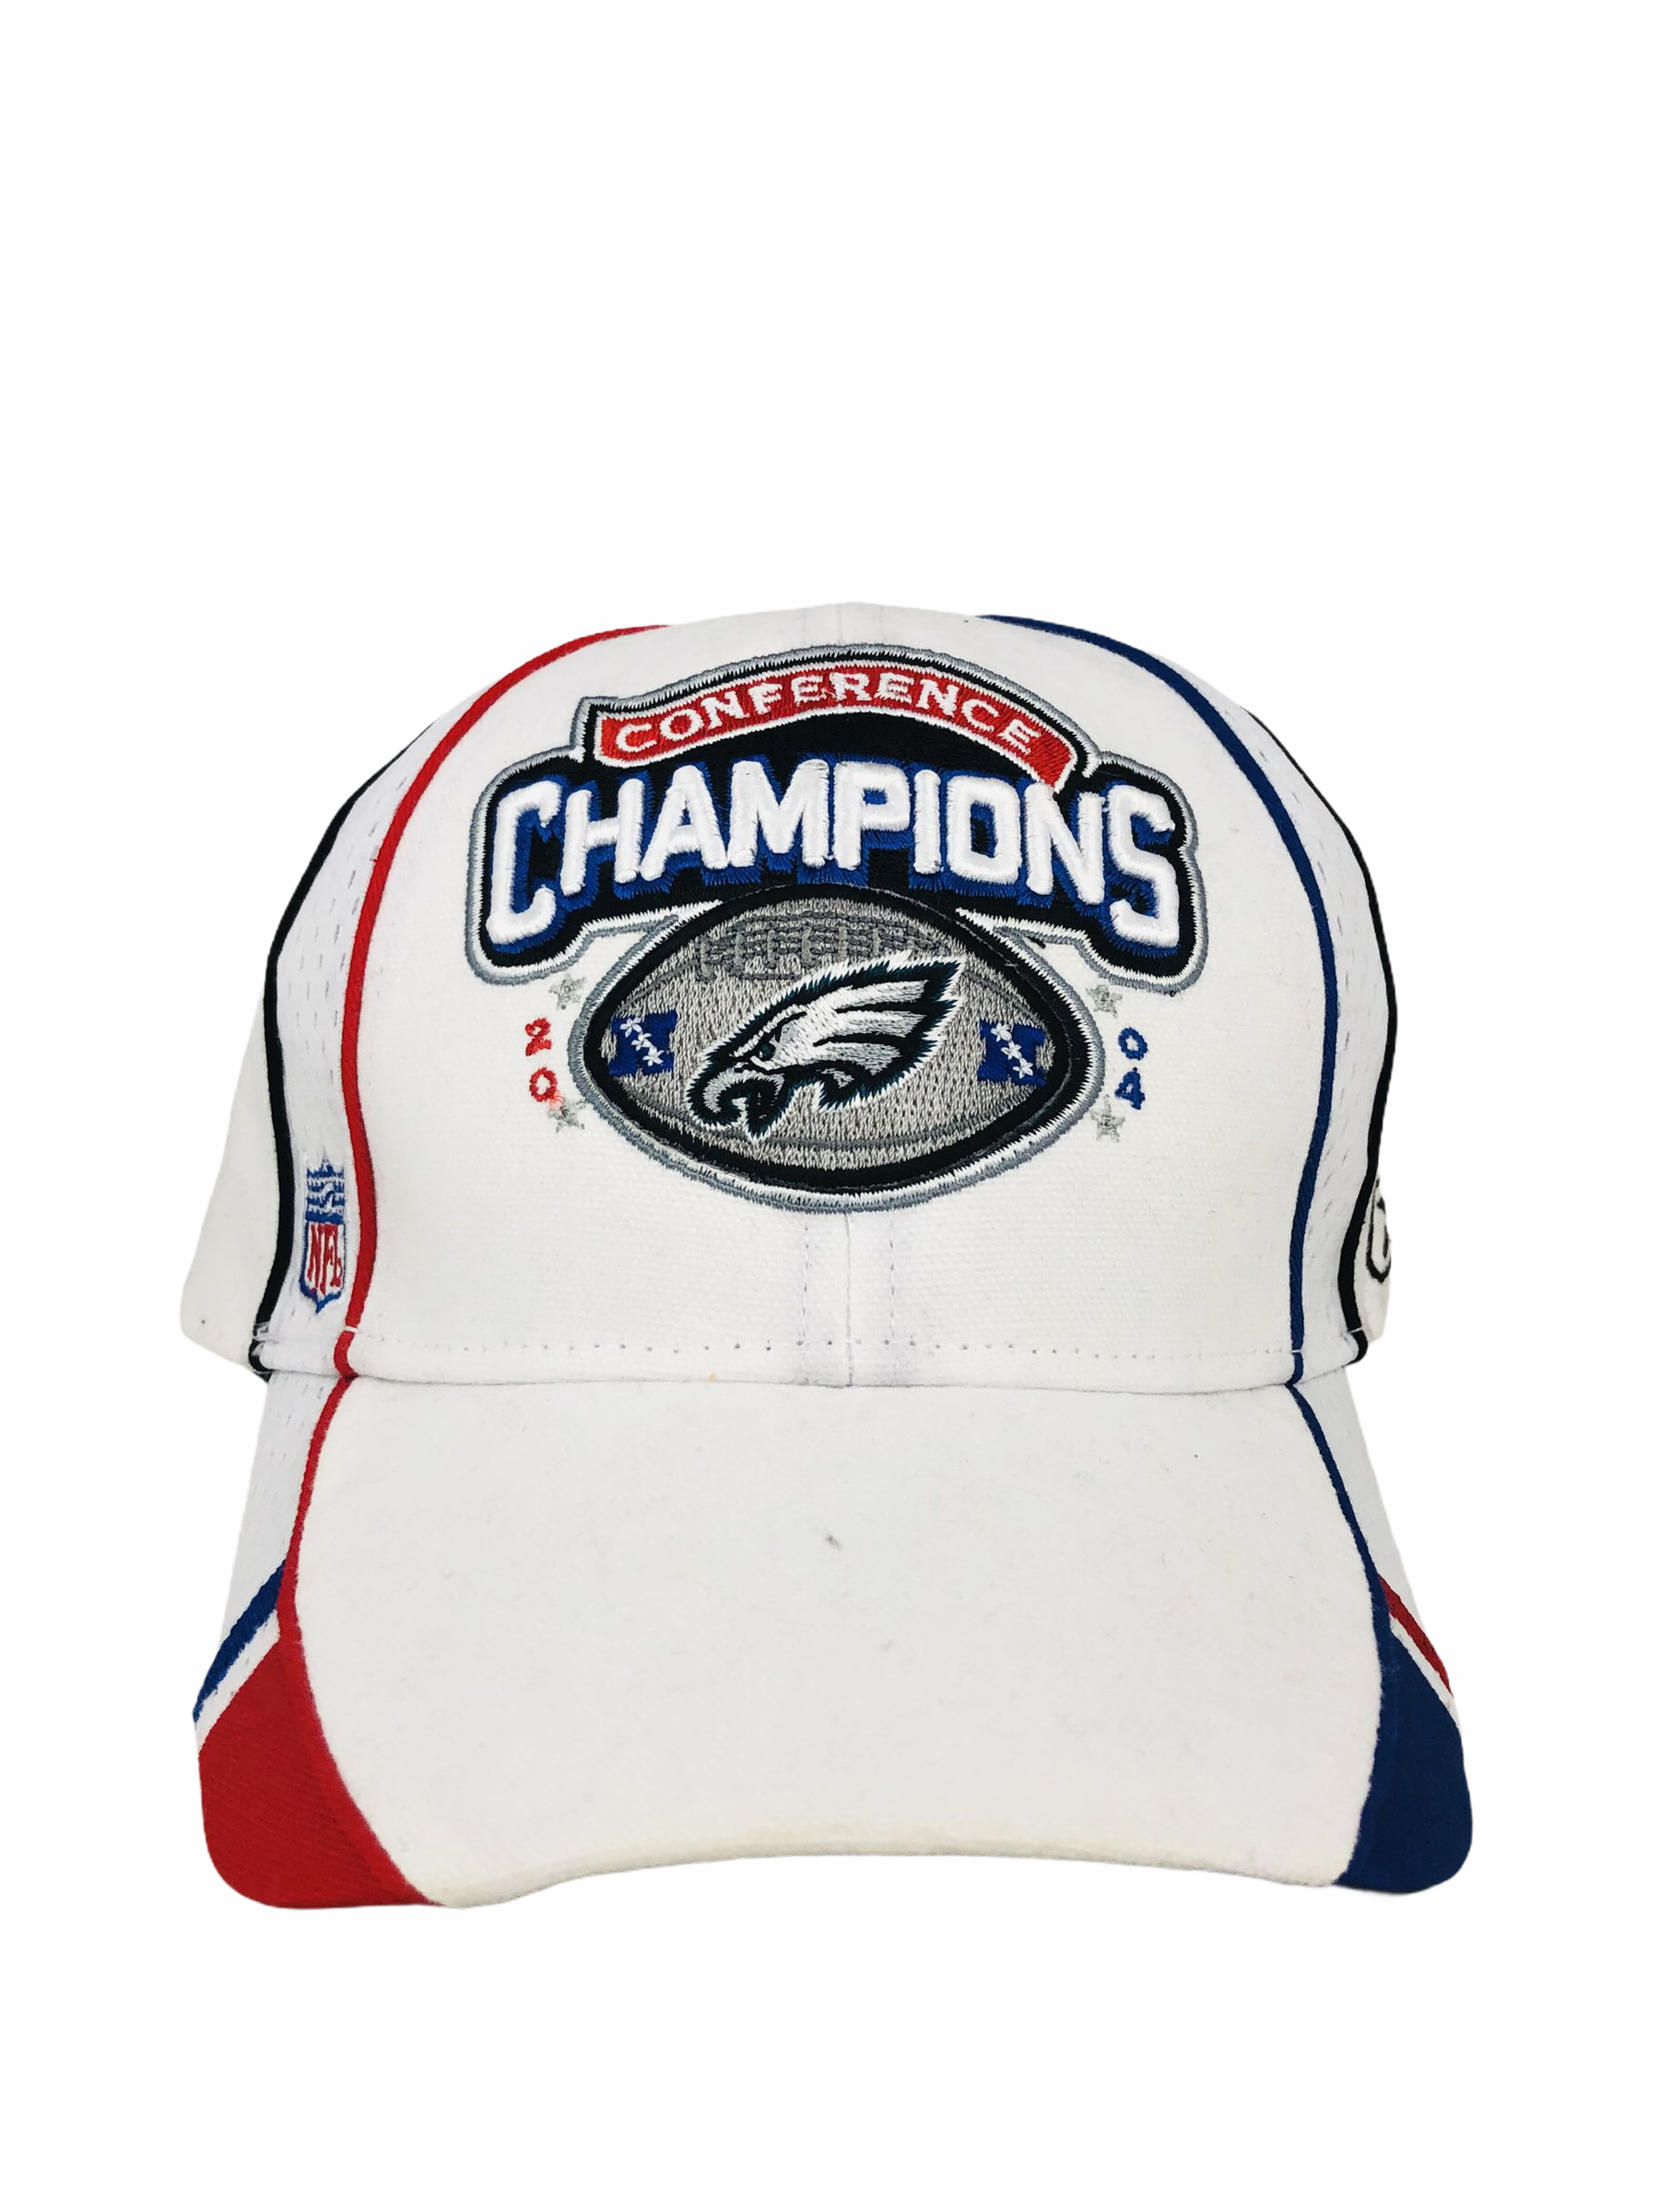 Where to get Philadelphia Eagles NFC Championship gear: Shirts, hats,  jerseys & more 